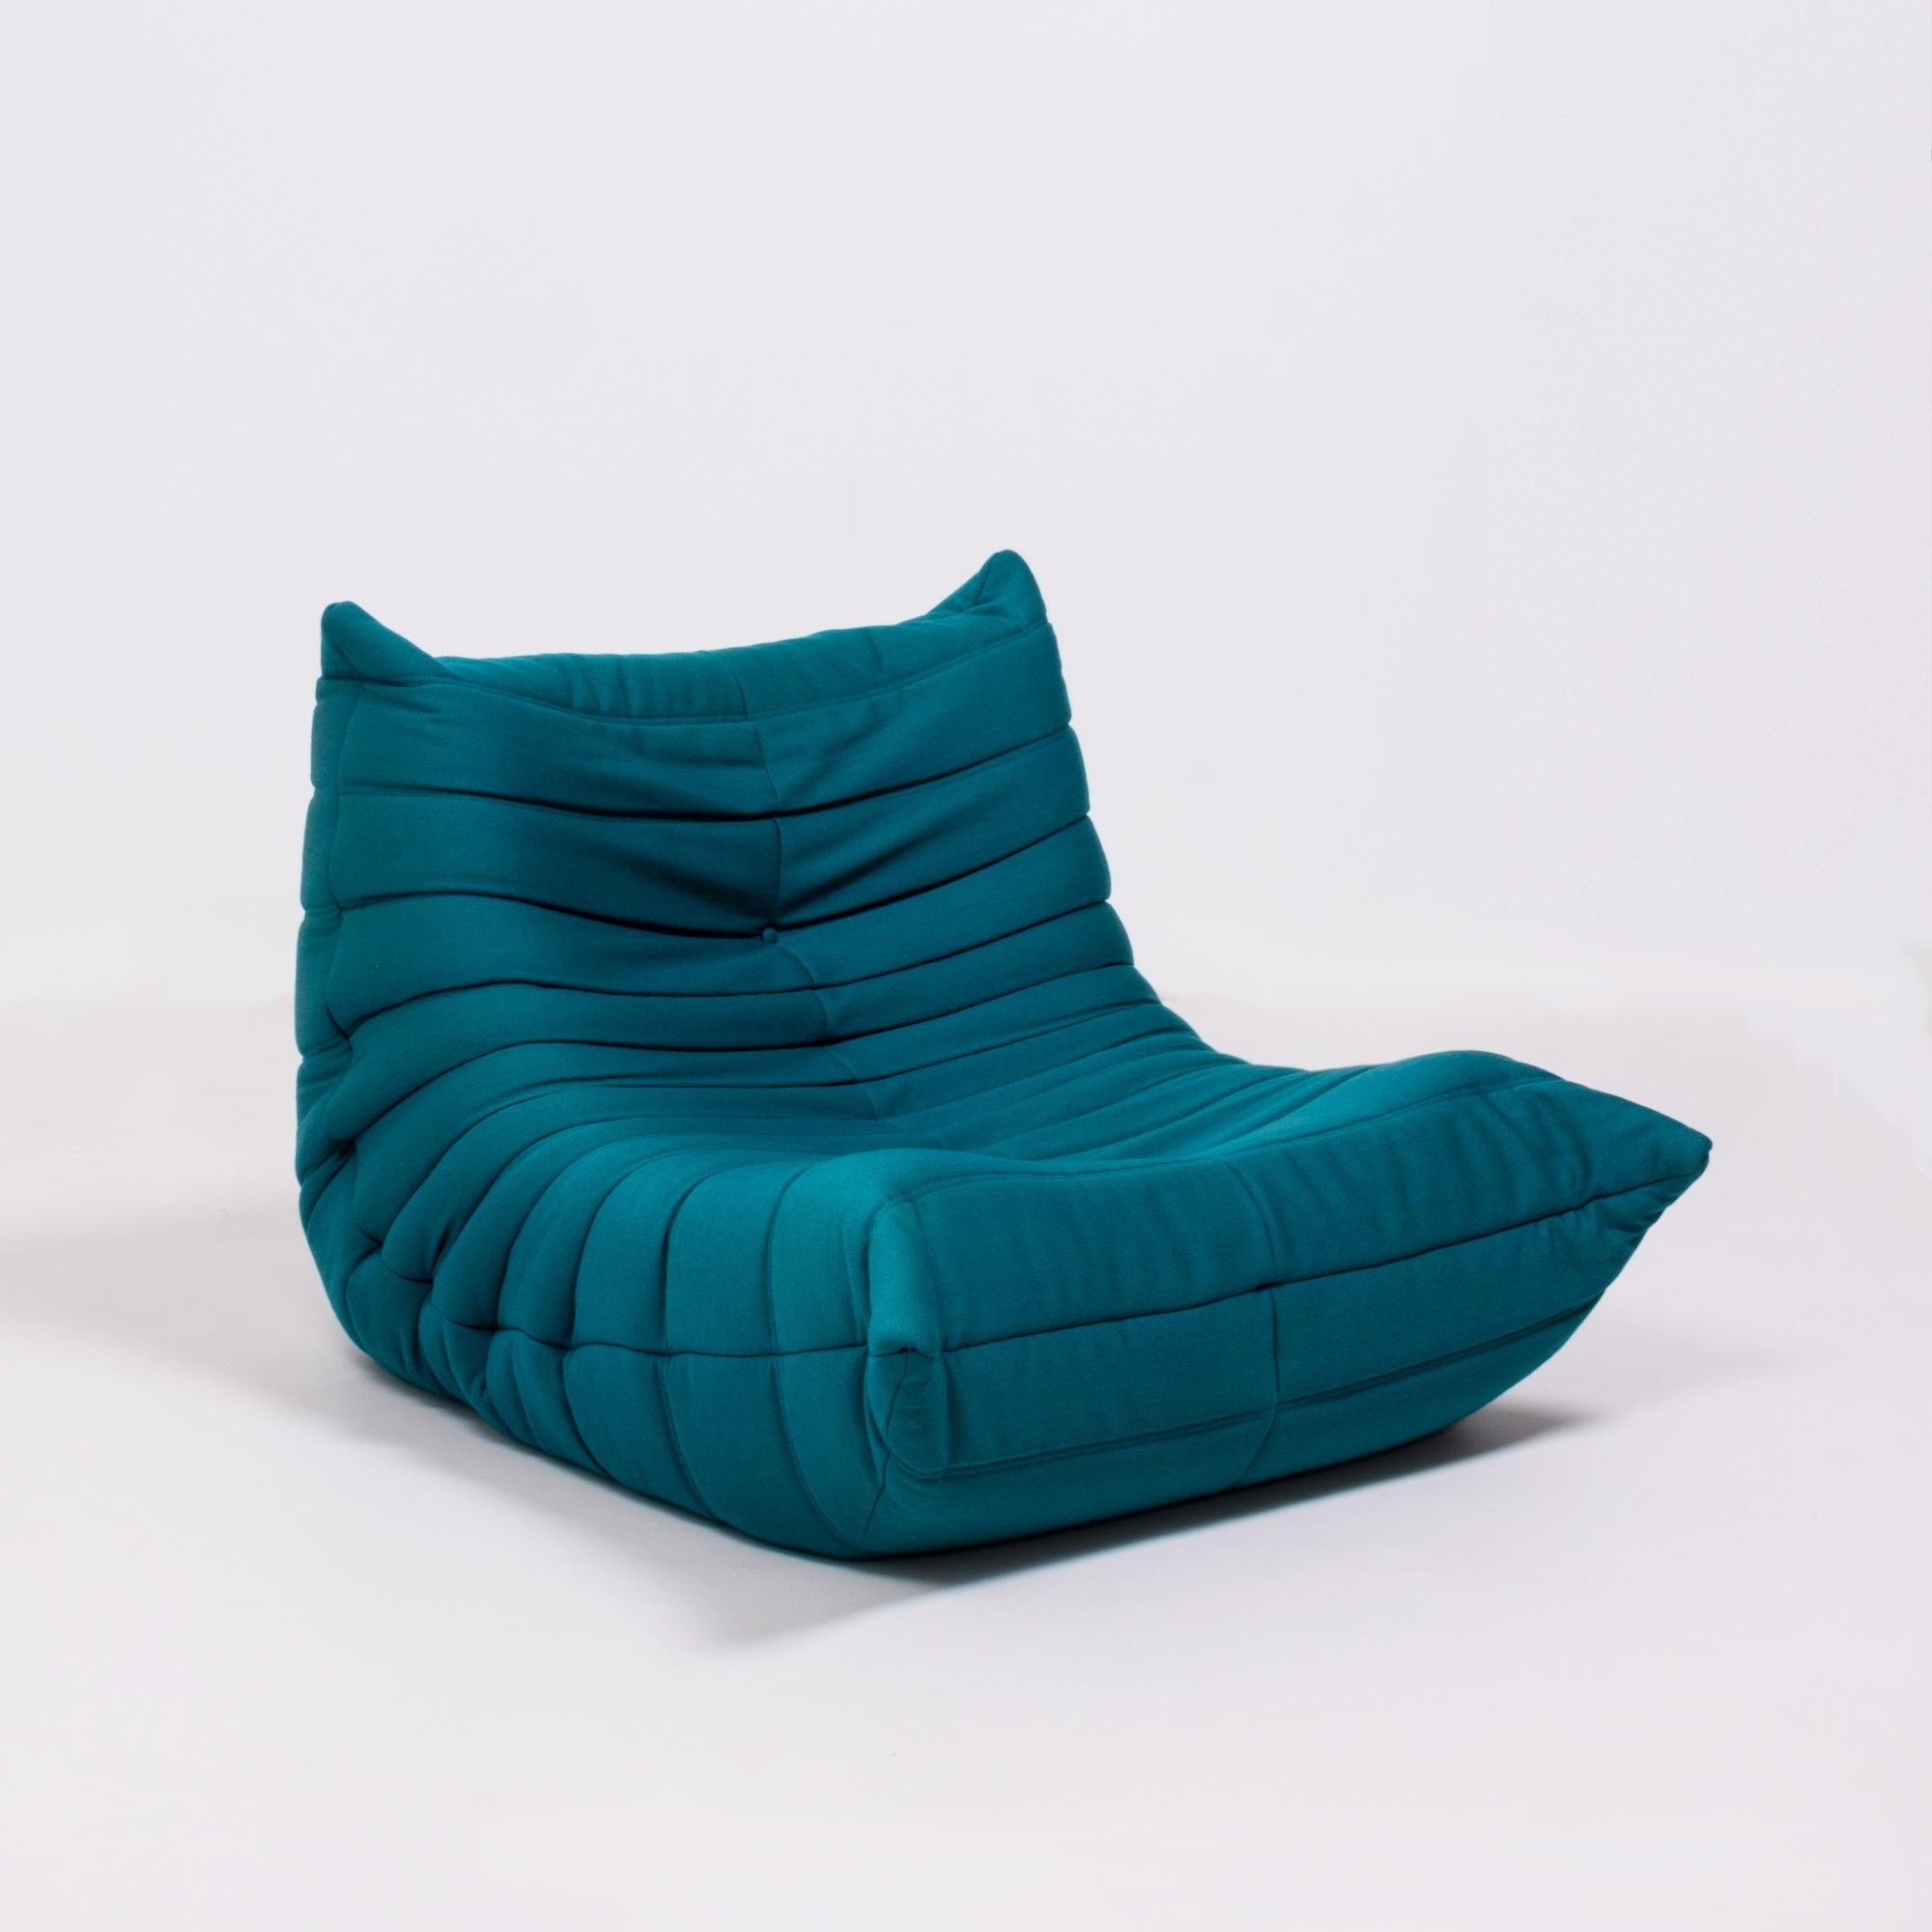 French Togo Teal Armchair and Footstool by Michel Ducaroy for Ligne Roset, Set of 2